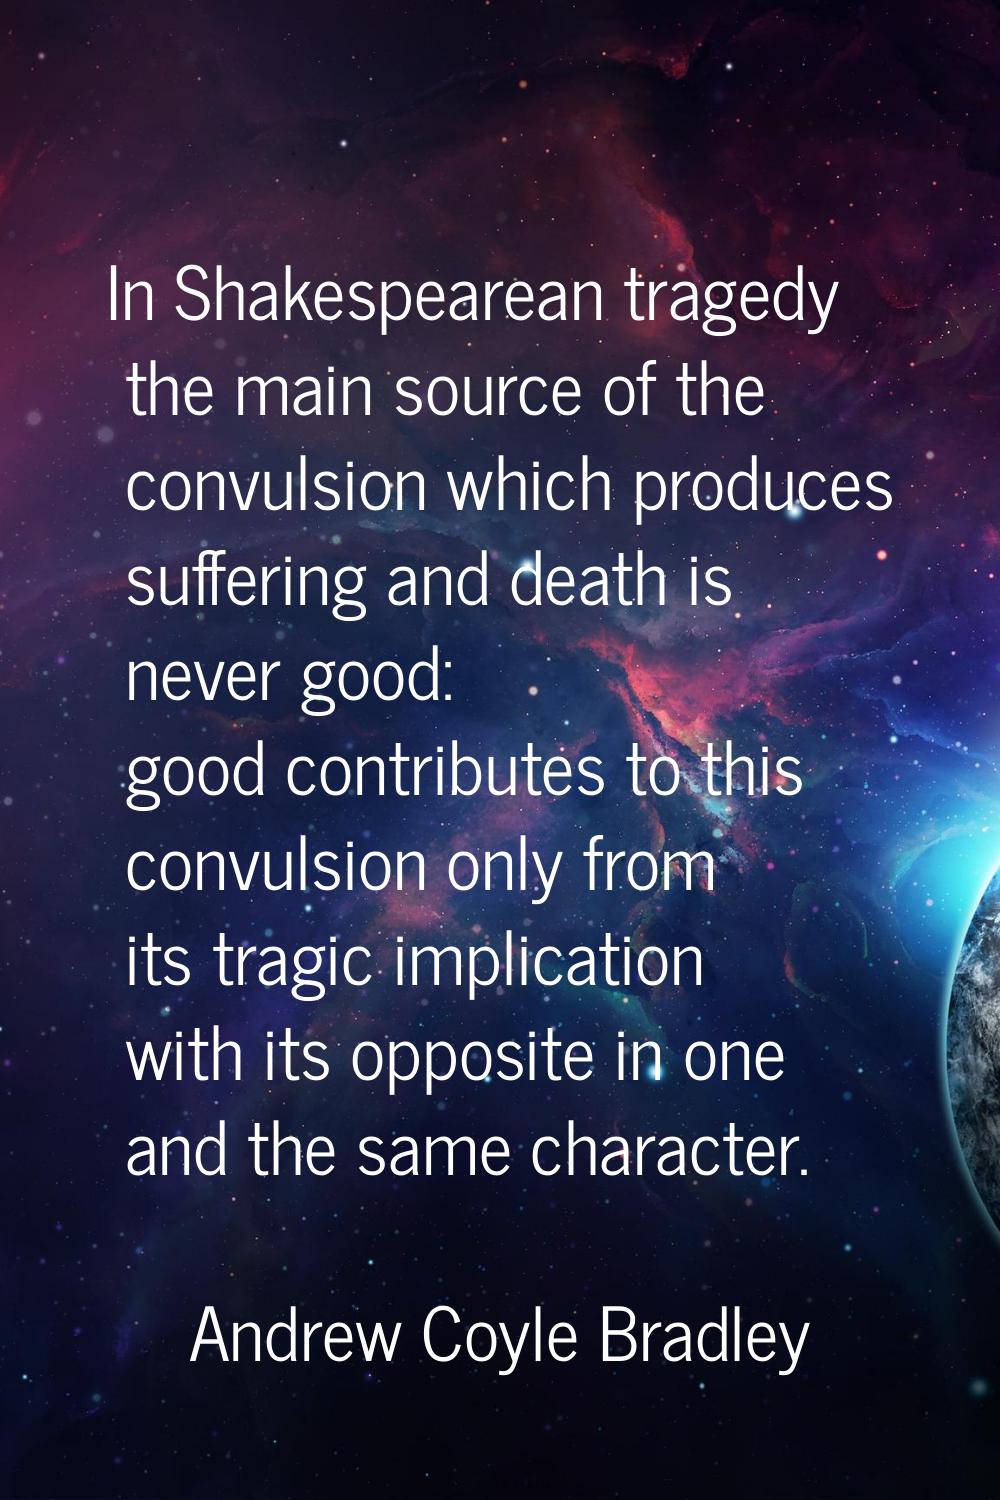 In Shakespearean tragedy the main source of the convulsion which produces suffering and death is ne